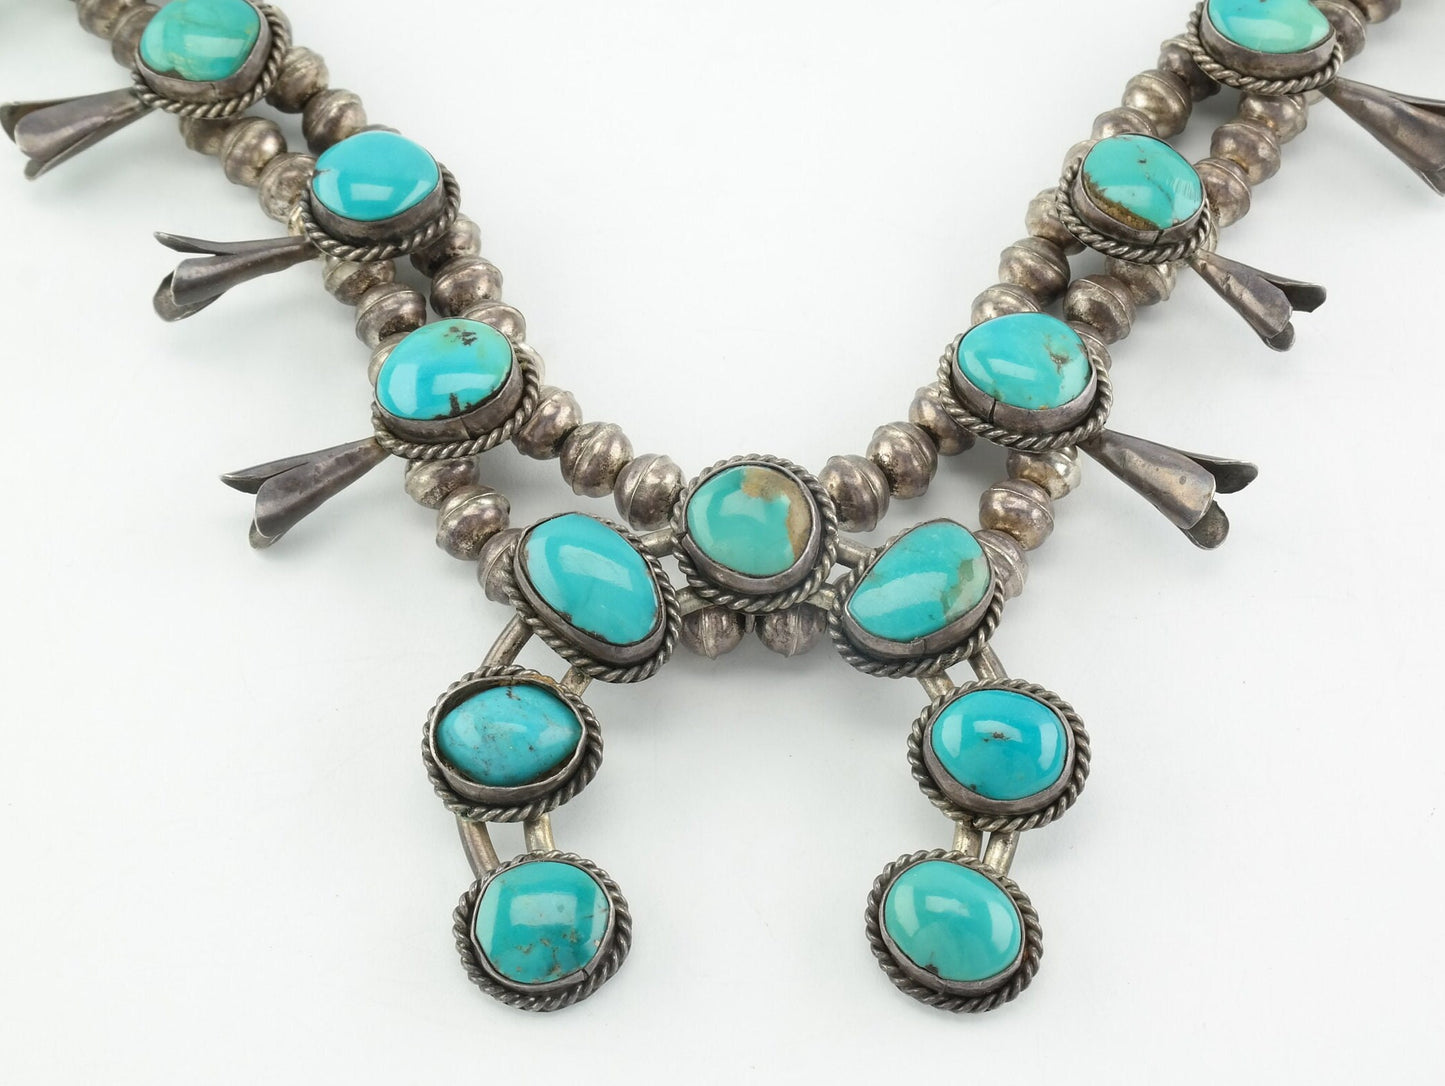 Vintage Sterling Silver Blue Turquoise Squash Blossom Necklace